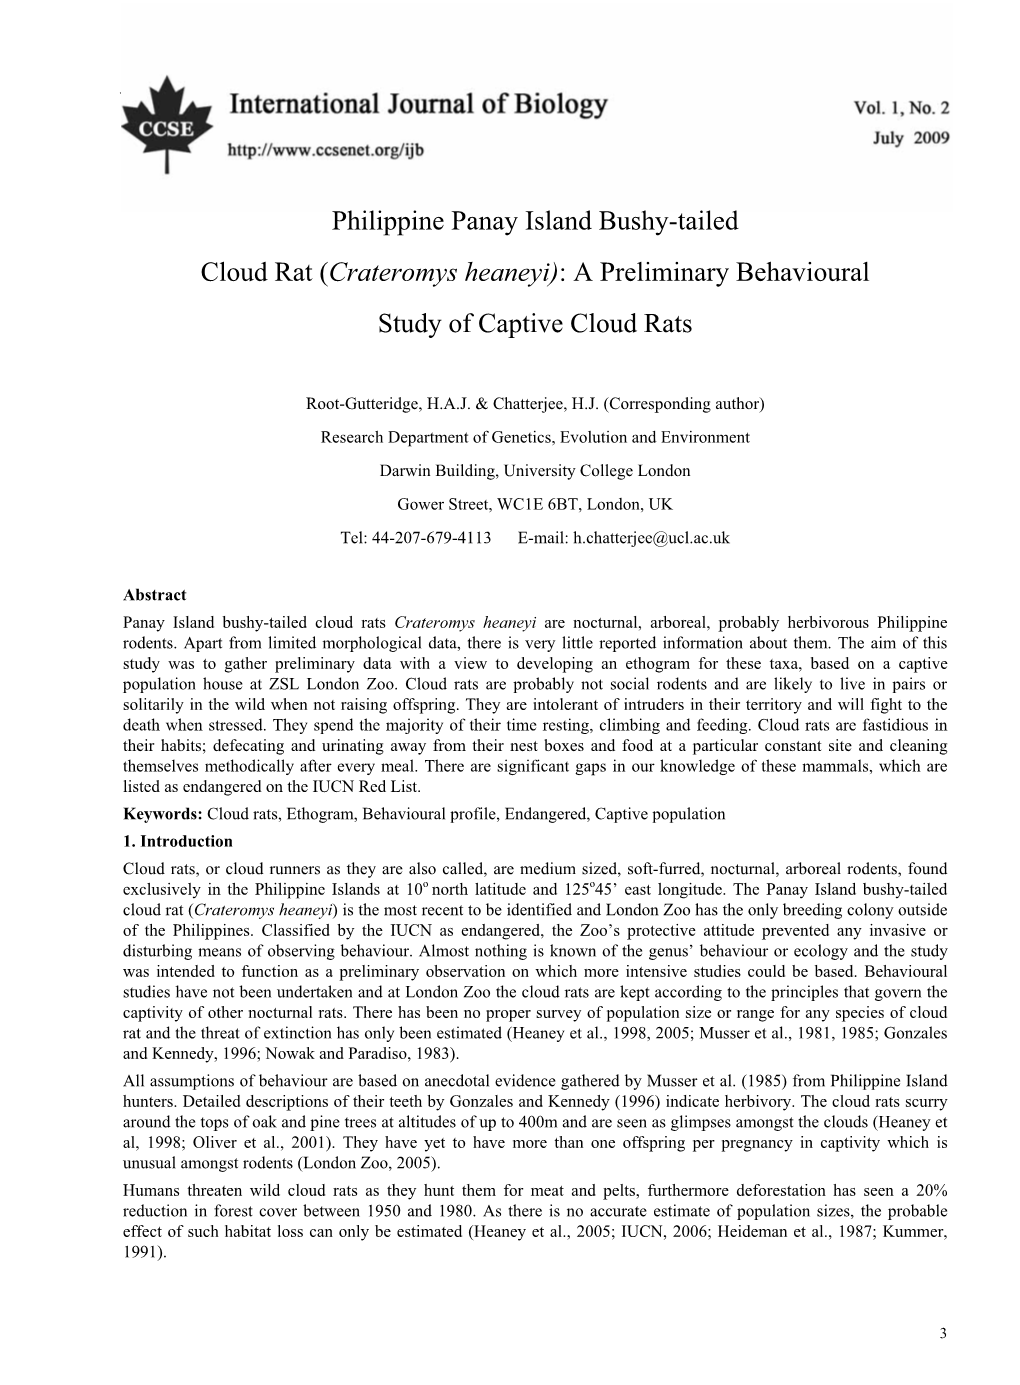 Philippine Panay Island Bushy-Tailed Cloud Rat (Crateromys Heaneyi): a Preliminary Behavioural Study of Captive Cloud Rats